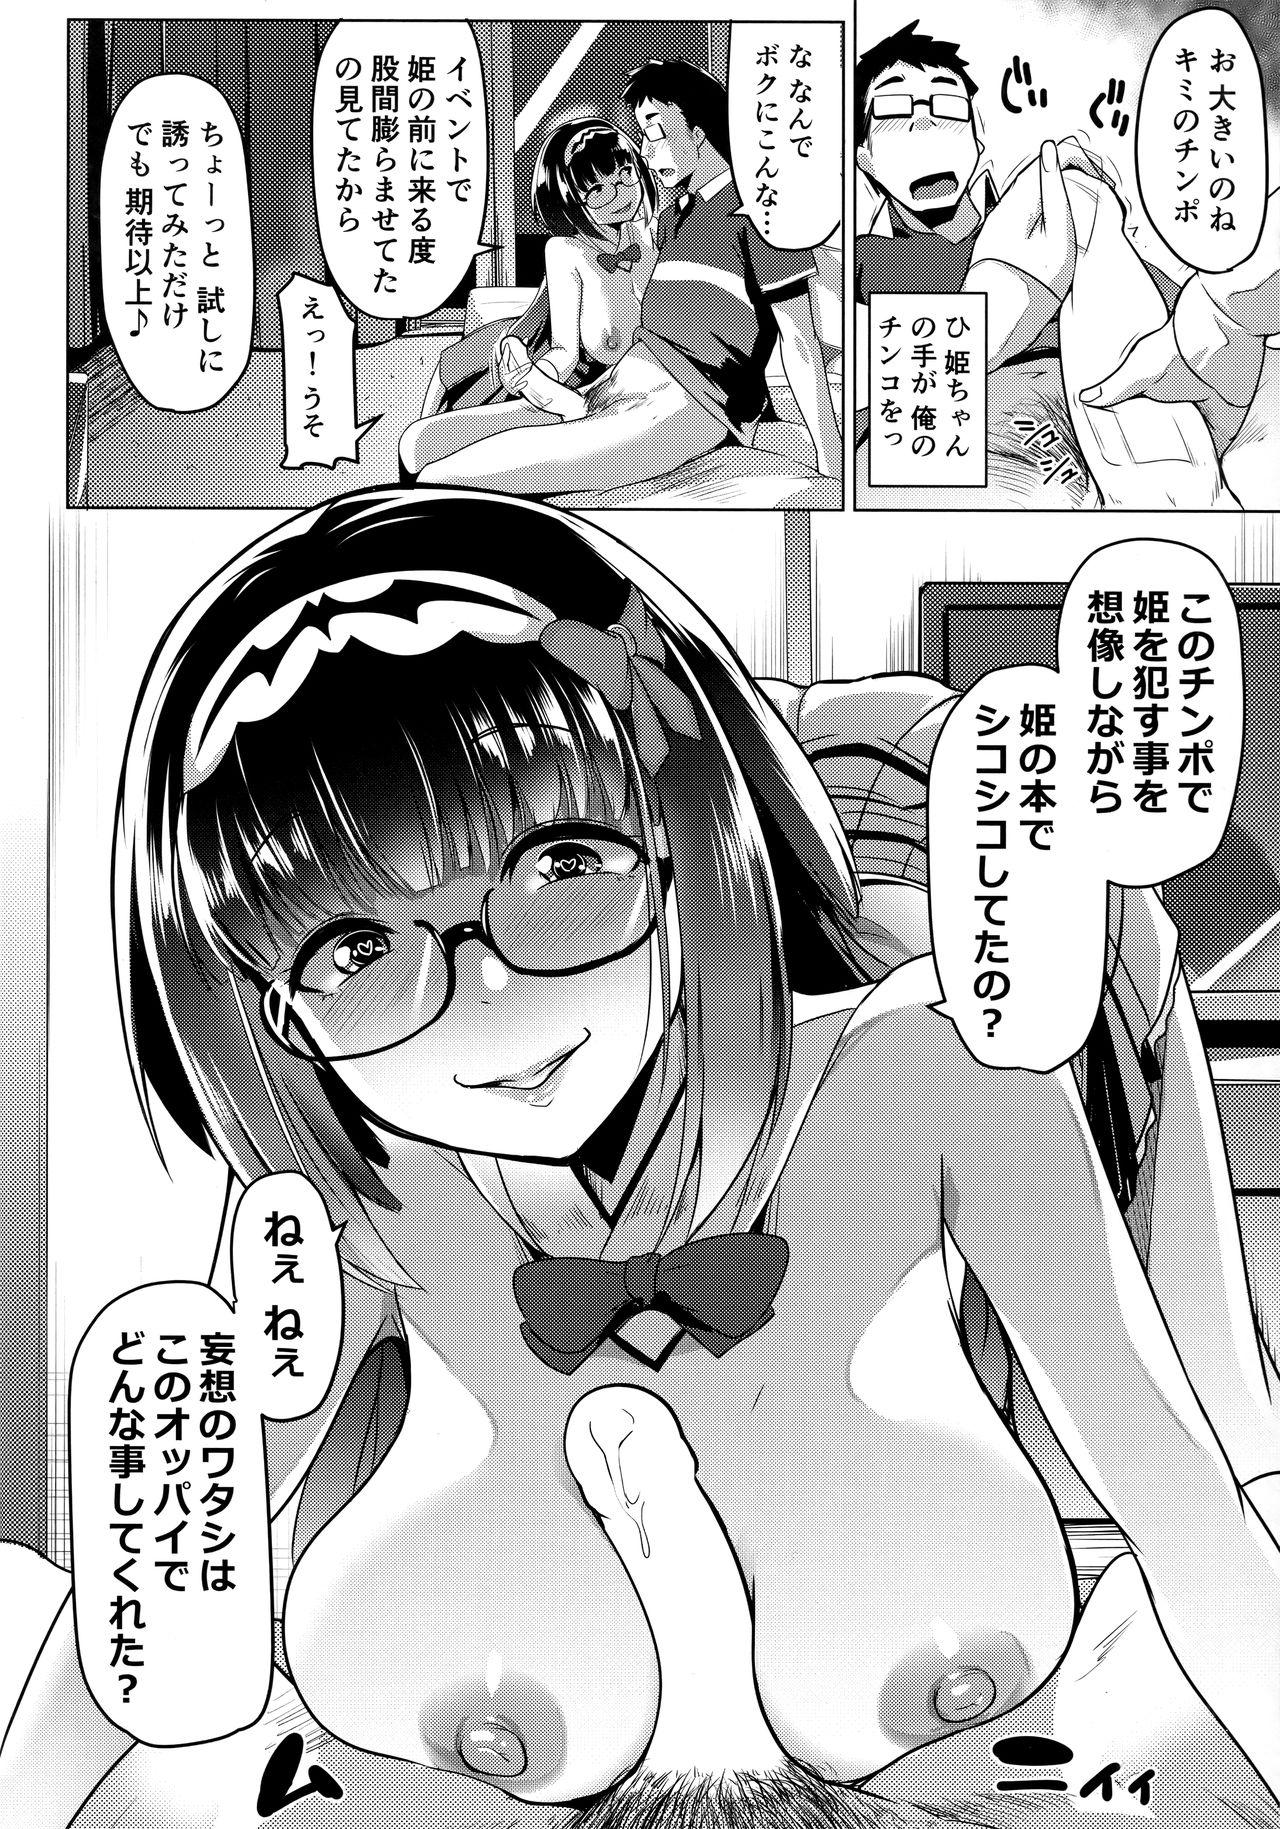 Strap On Osaka Bitch DT - Fate grand order Anal Creampie - Page 13